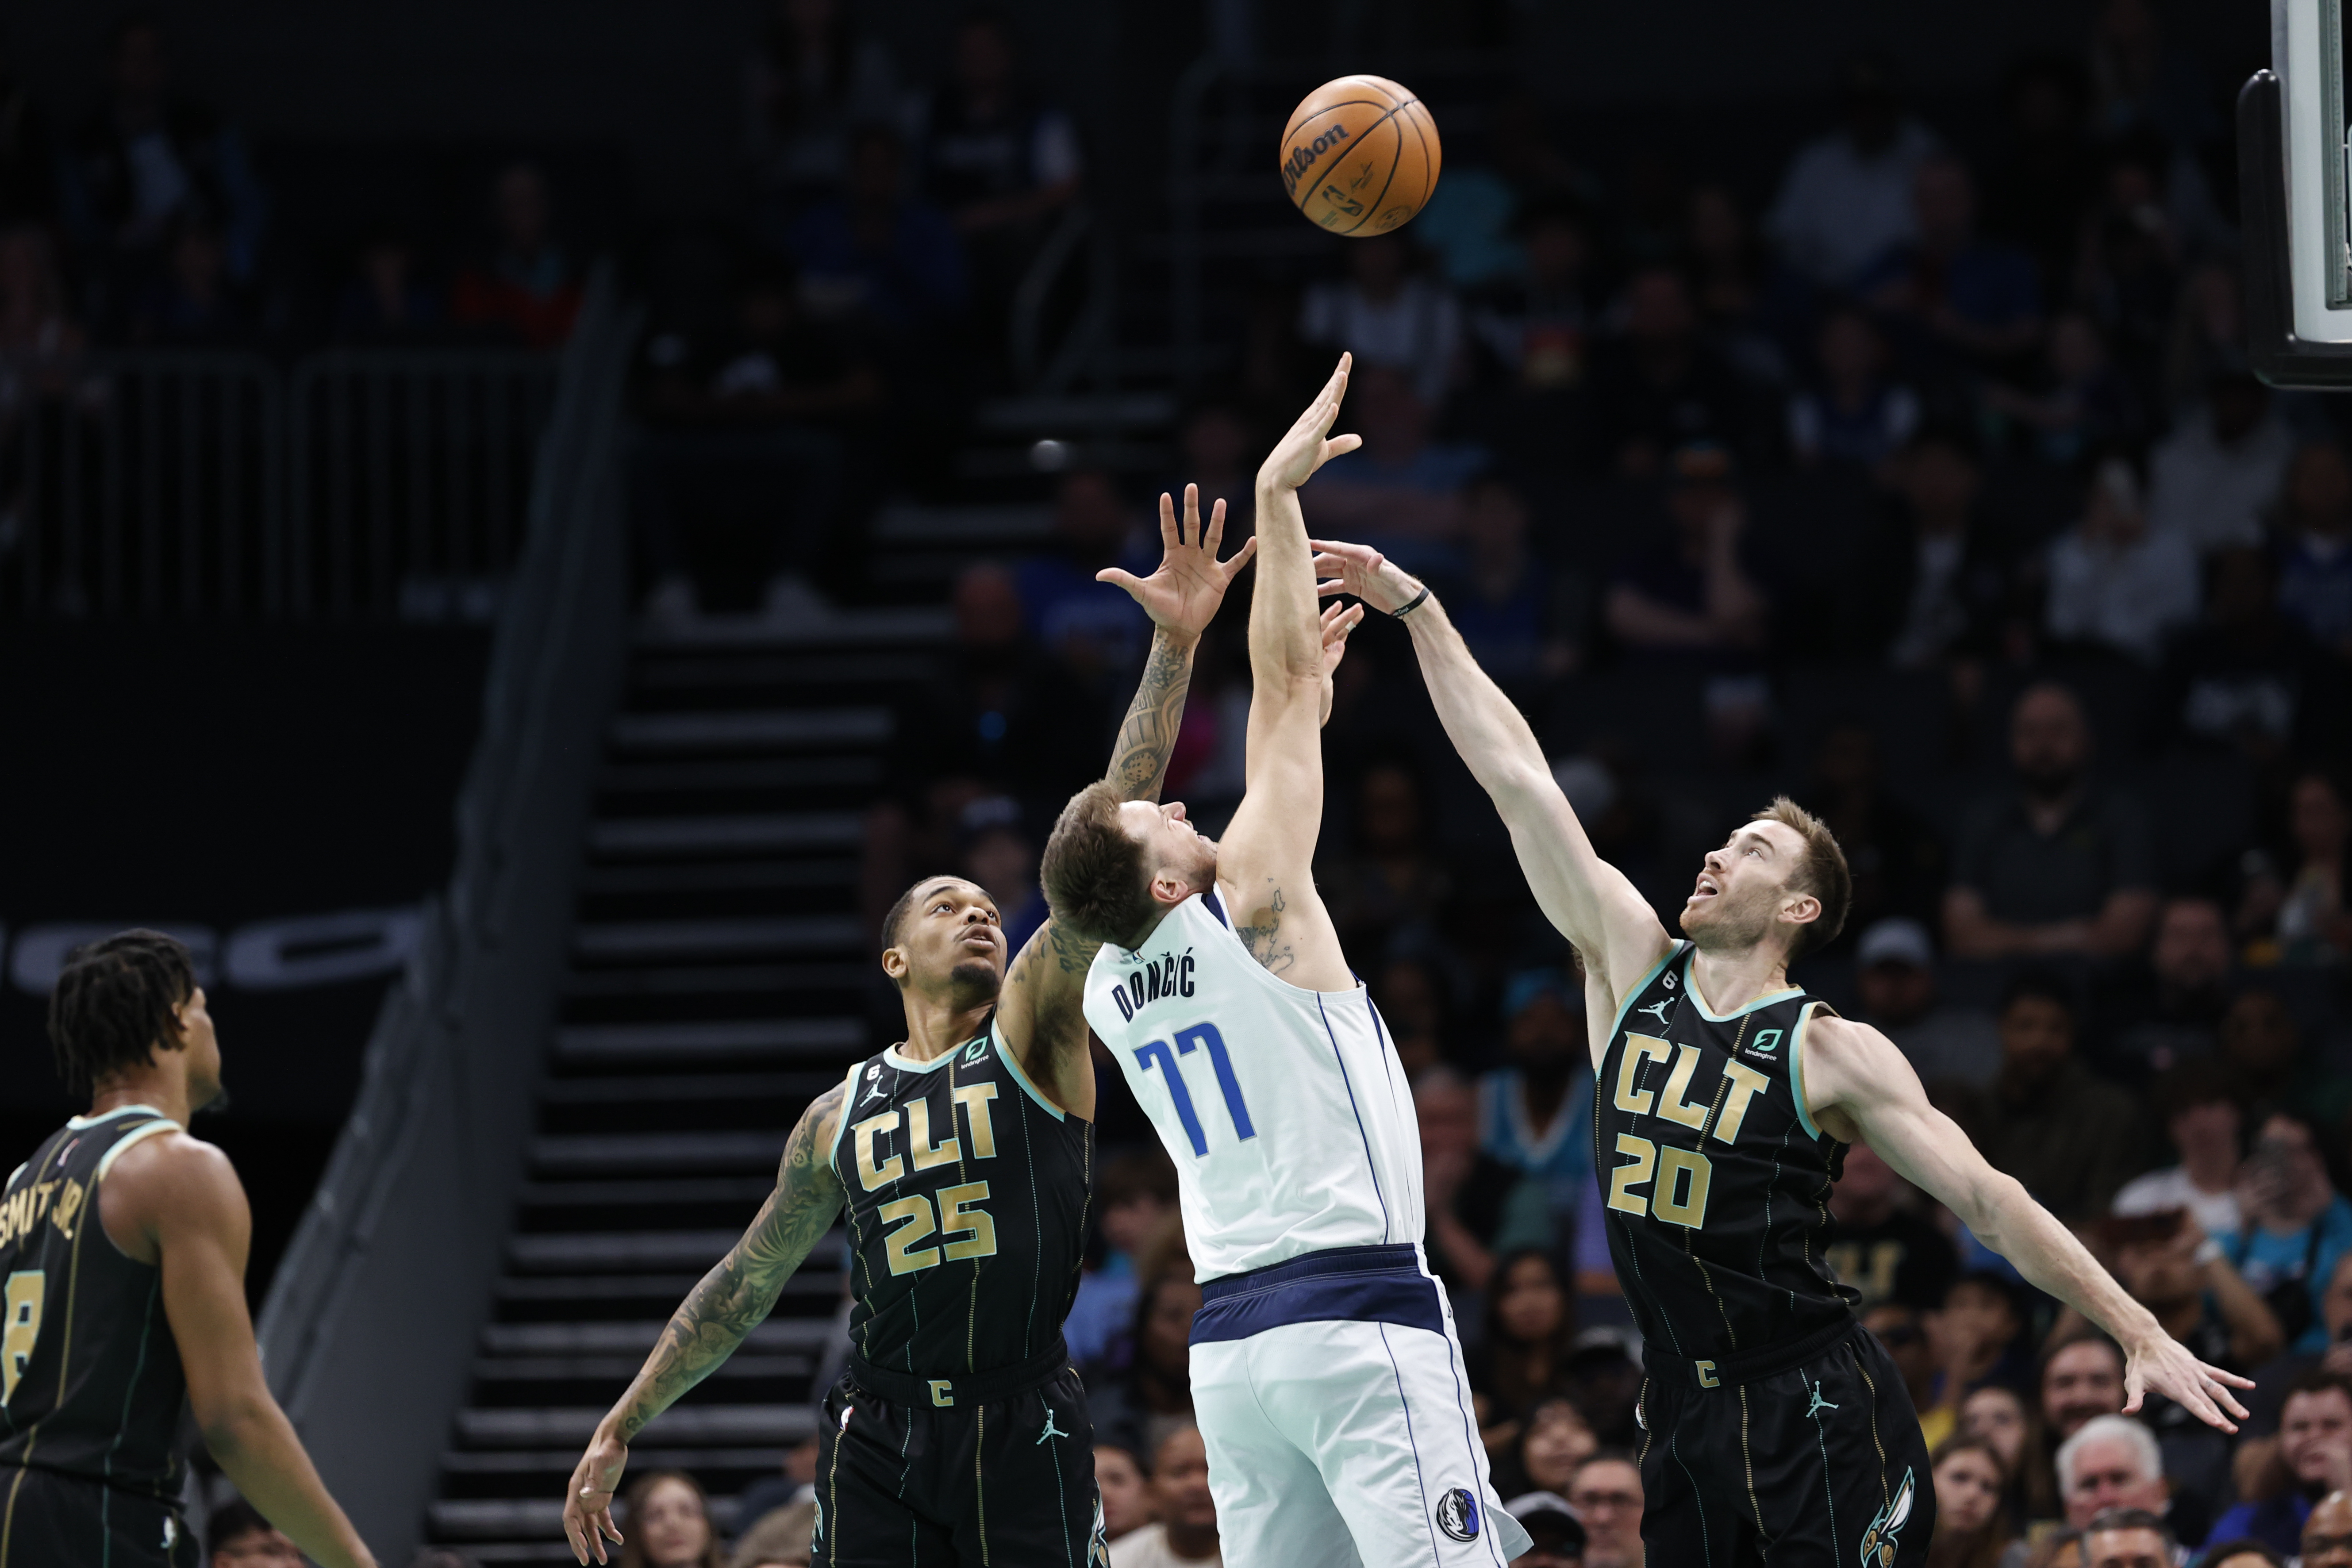 Gordon Hayward healthy (for now), doing it all for Charlotte